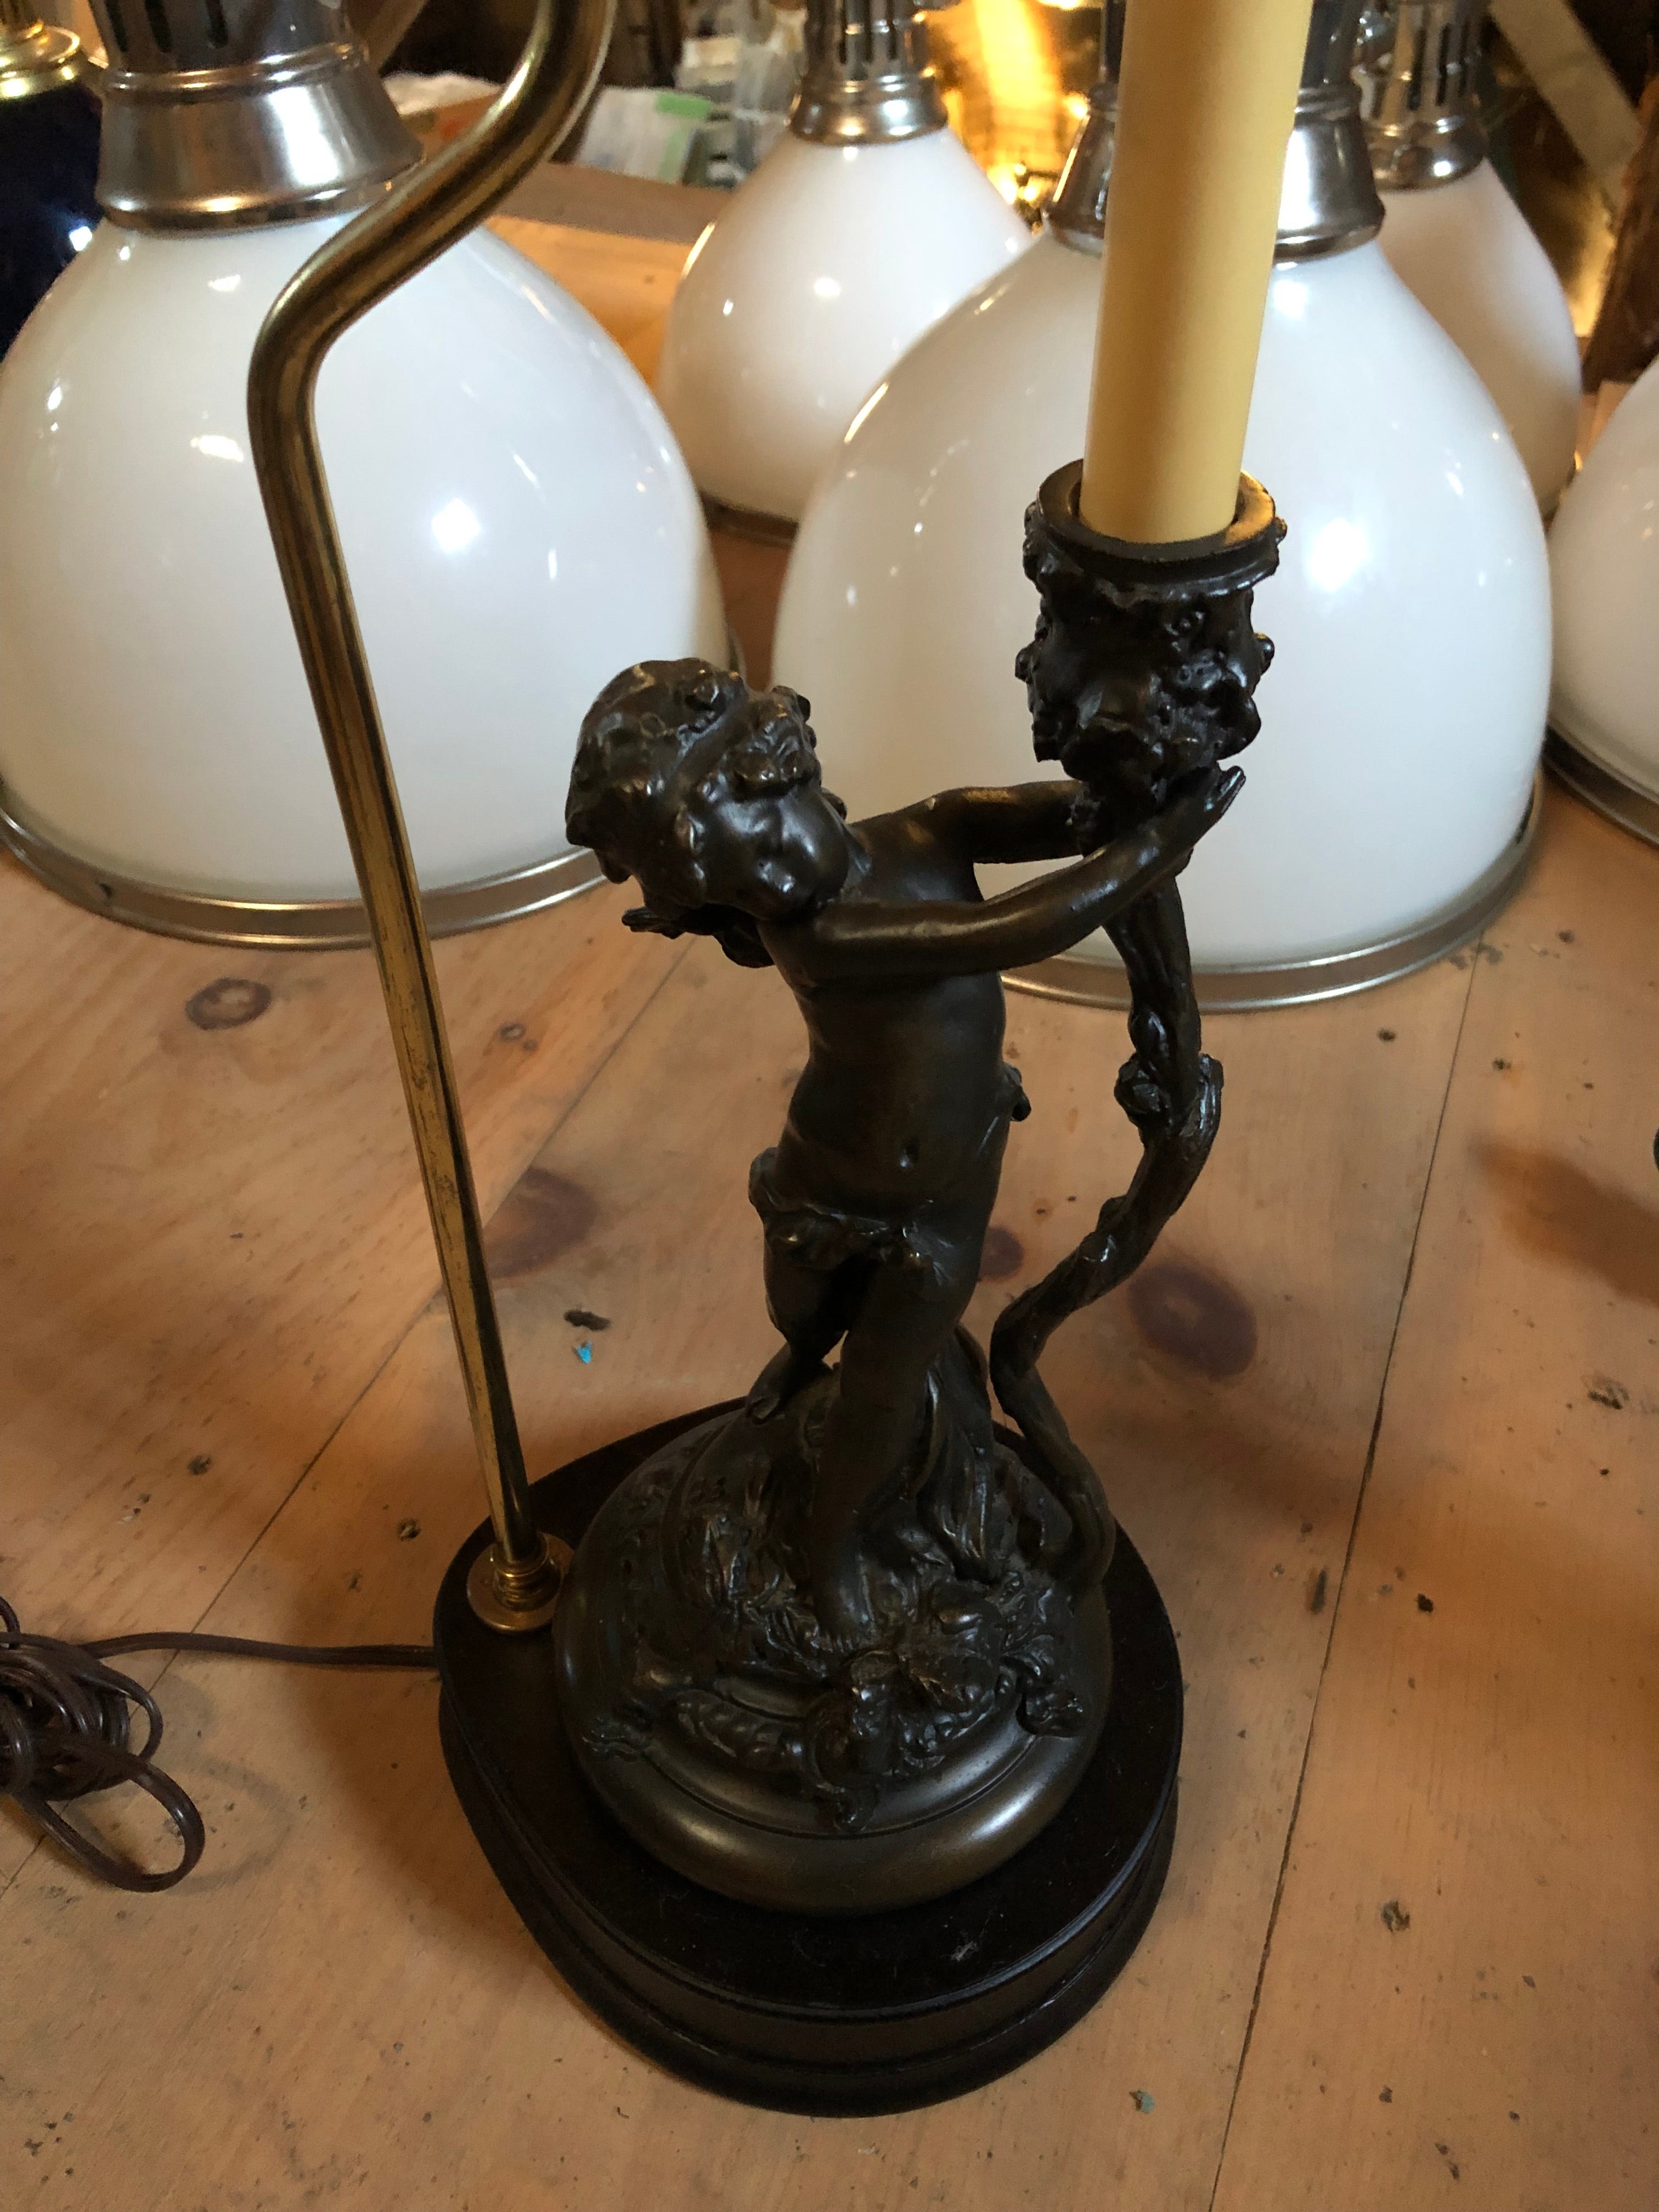 Sweet pair of cherub motif table lamps having single sculptural putti on each wooden base holding a candle form. Metal has a rubbed bronze finish.
No shades included.
While the lamps match, the figures are not set on the stands in exactly the same